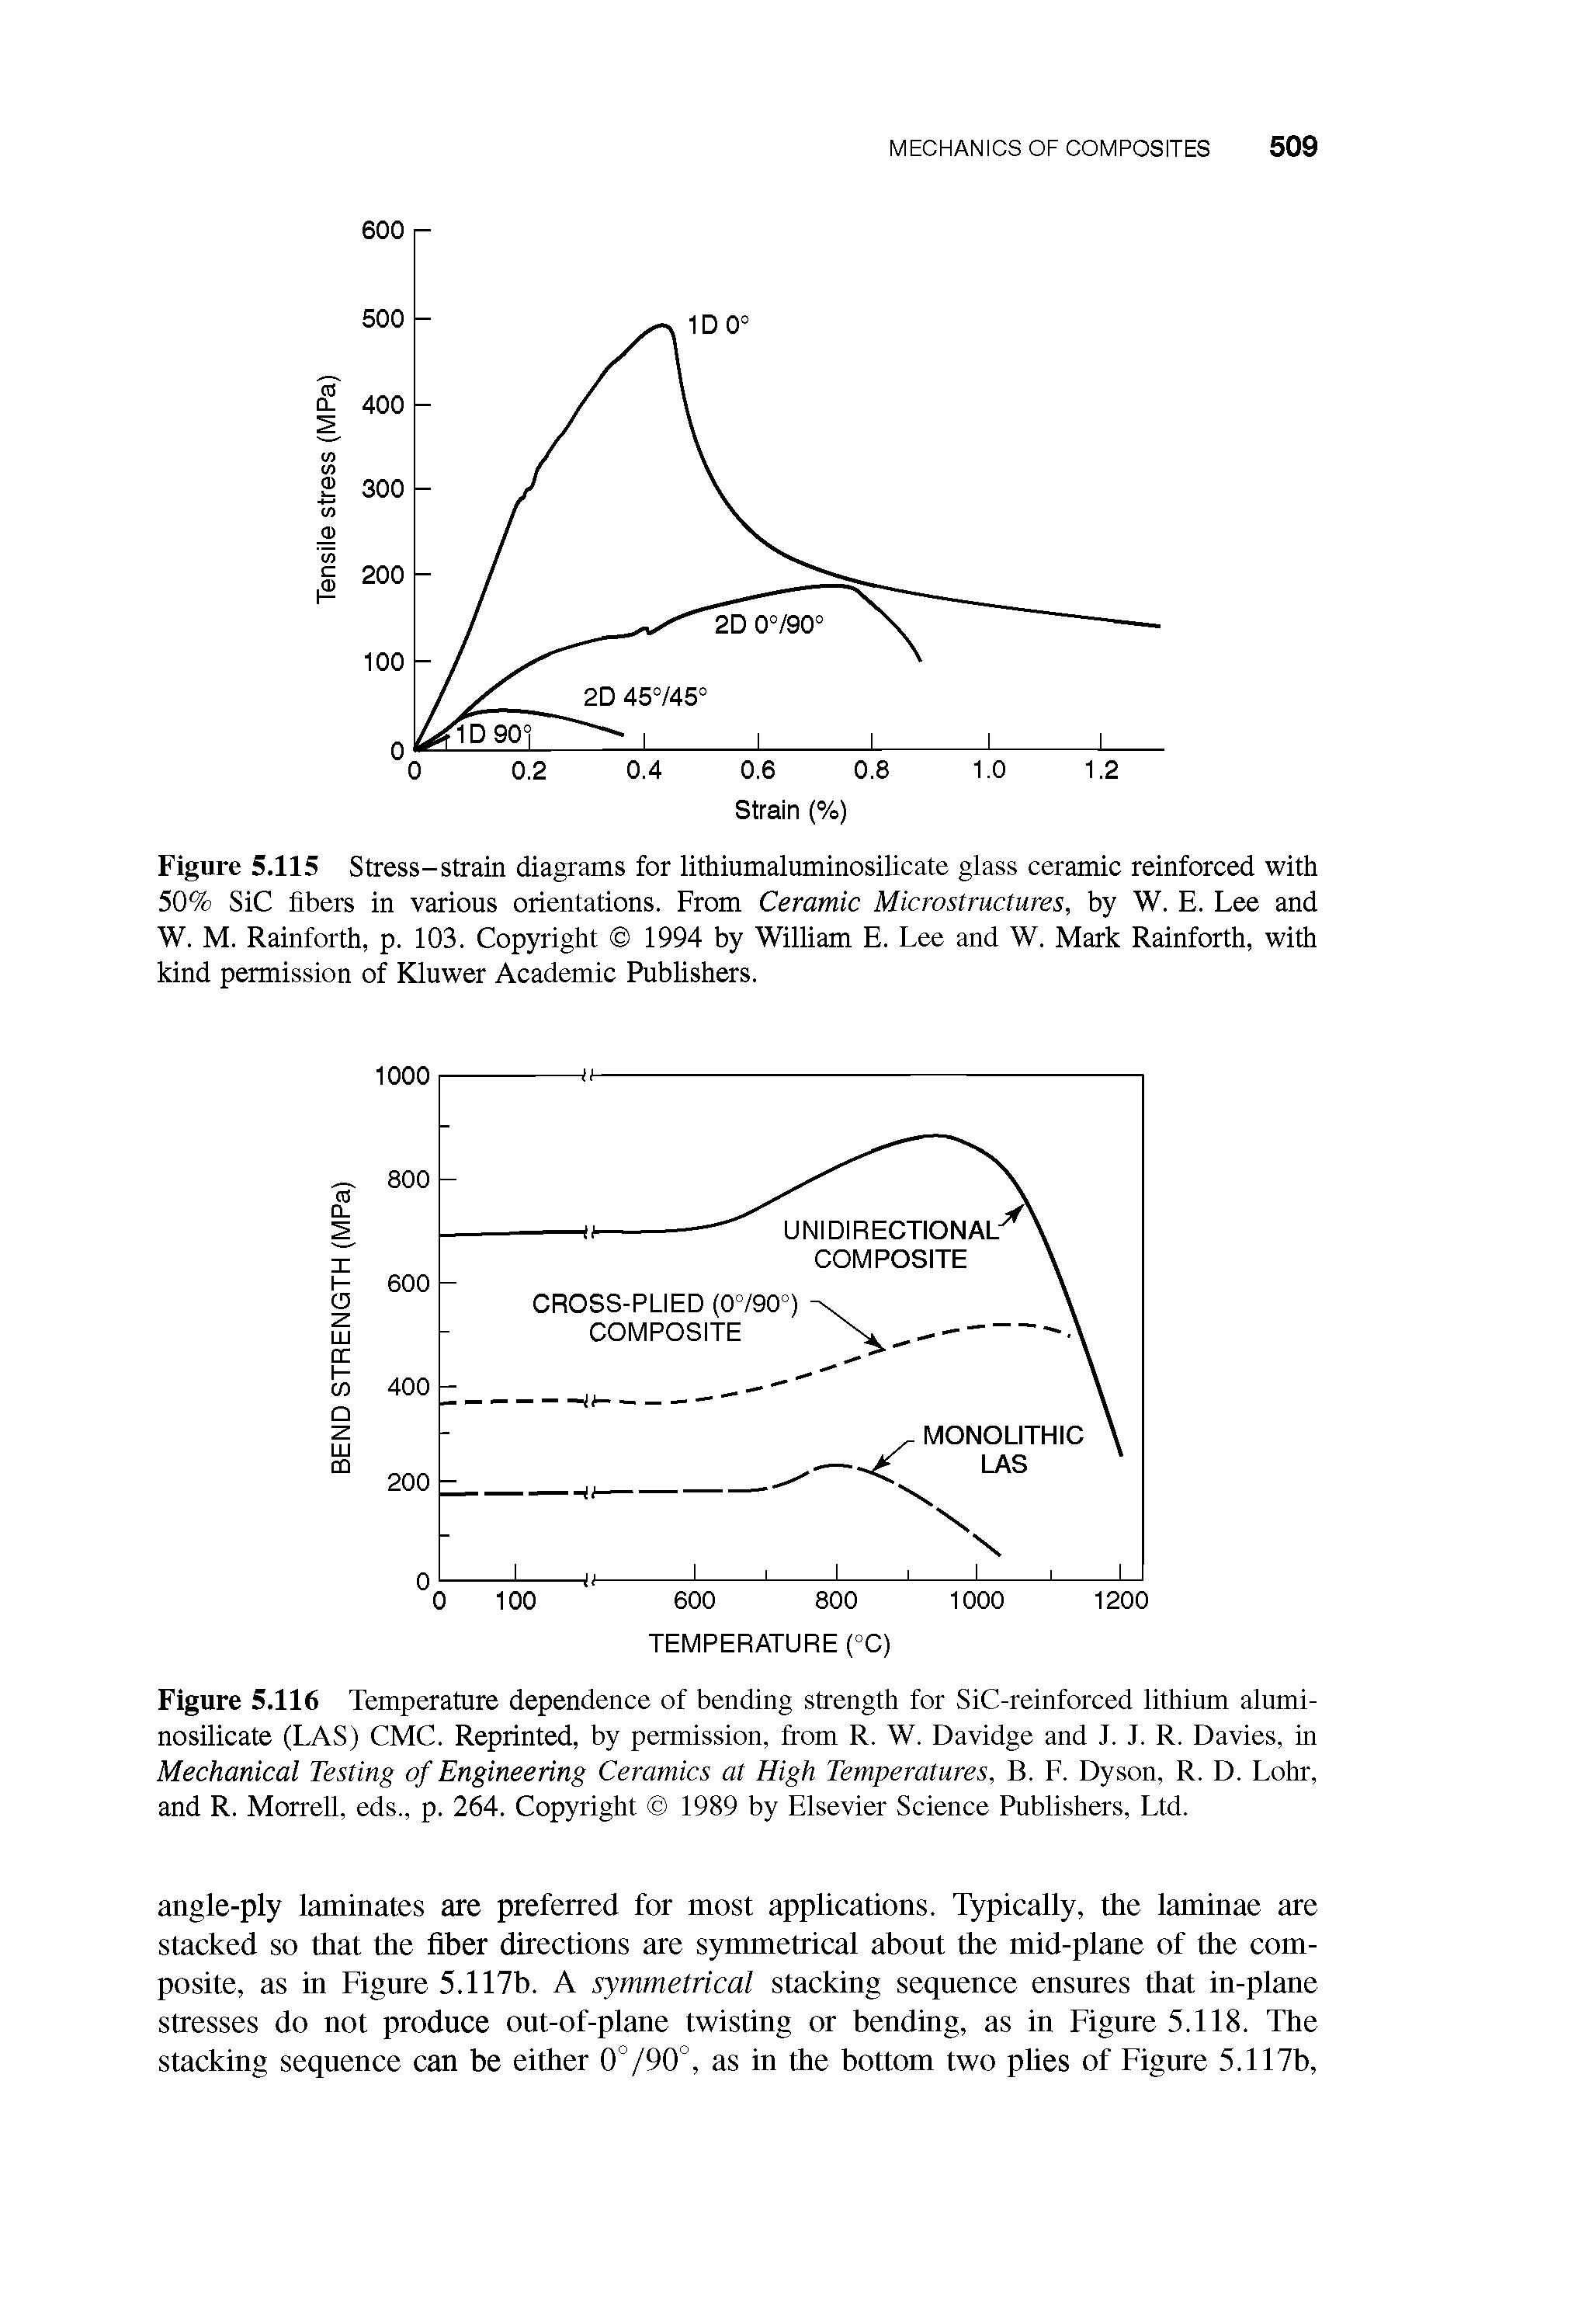 Figure 5.116 Temperature dependence of bending strength for SiC-reinforced lithium aluminosilicate (LAS) CMC. Reprinted, by permission, from R. W. Davidge and J. J. R. Davies, in Mechanical Testing of Engineering Ceramics at High Temperatures, B. F. Dyson, R. D. Lohr, and R. Morrell, eds., p. 264. Copyright 1989 by Elsevier Science Publishers, Ltd.